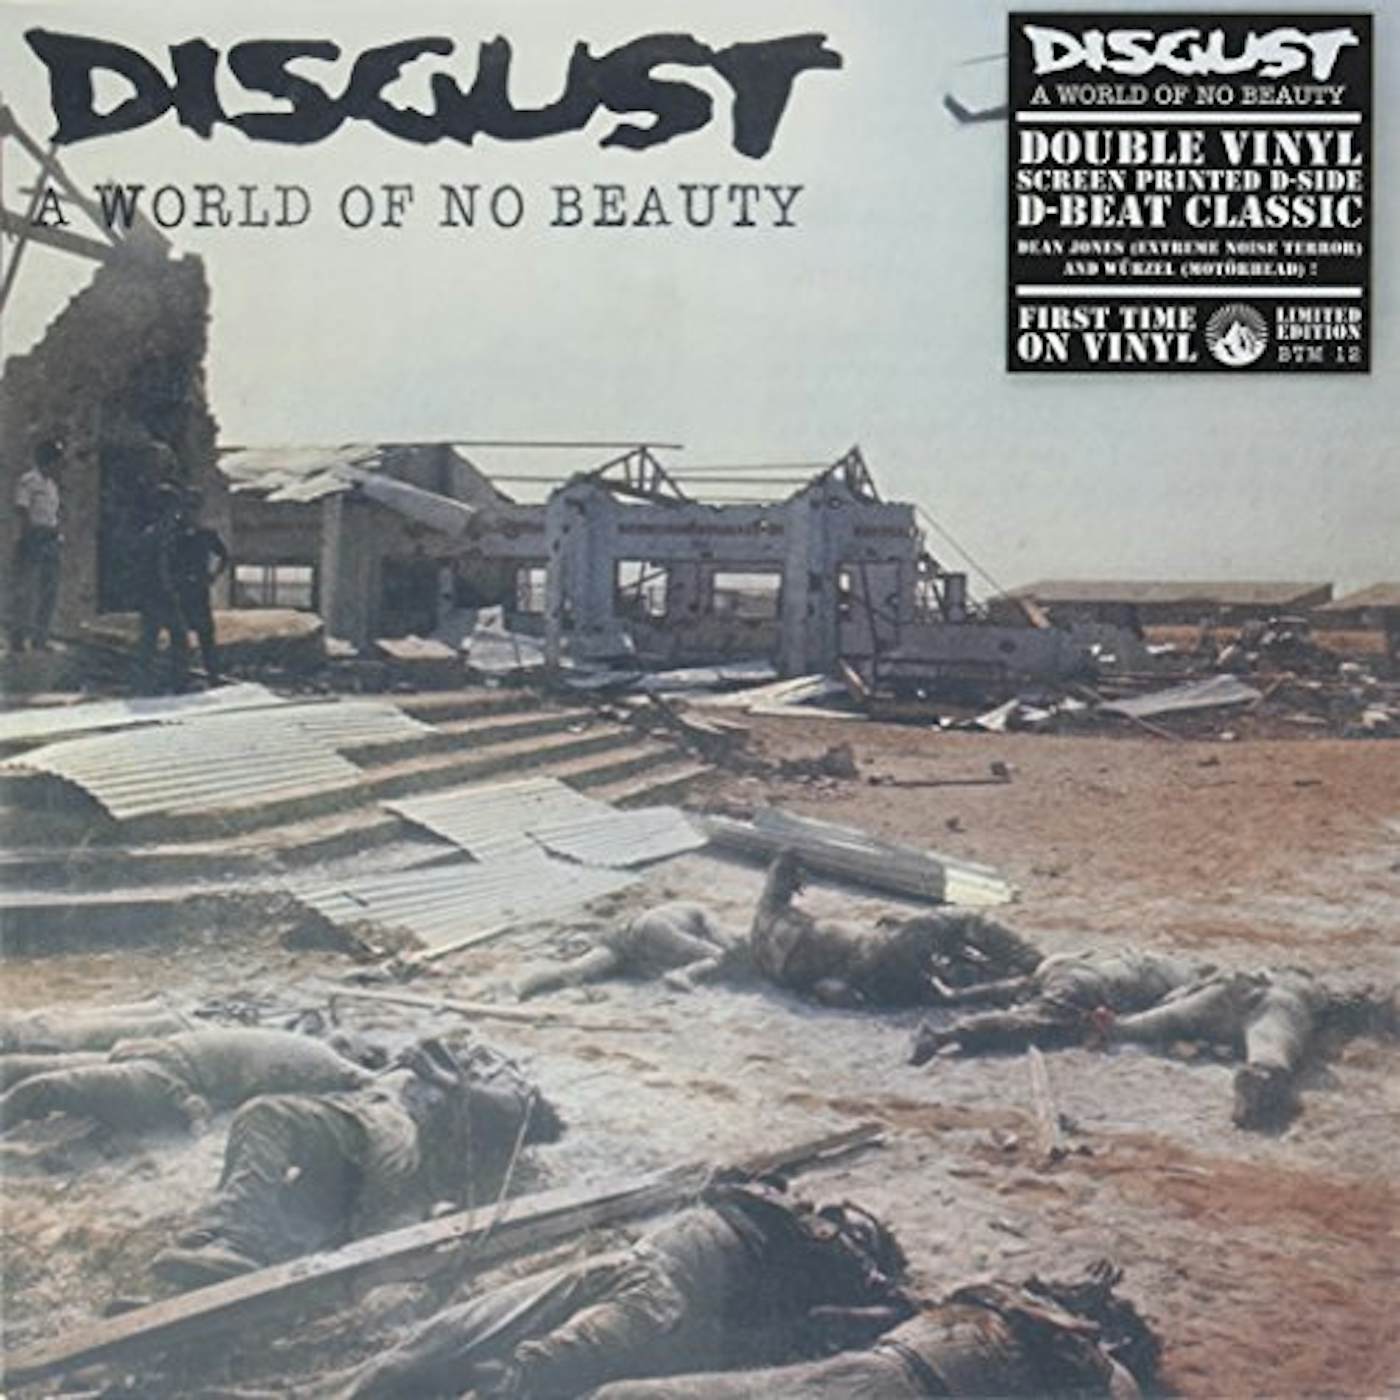 Disgust WORLD OF NO BEAUTY Vinyl Record